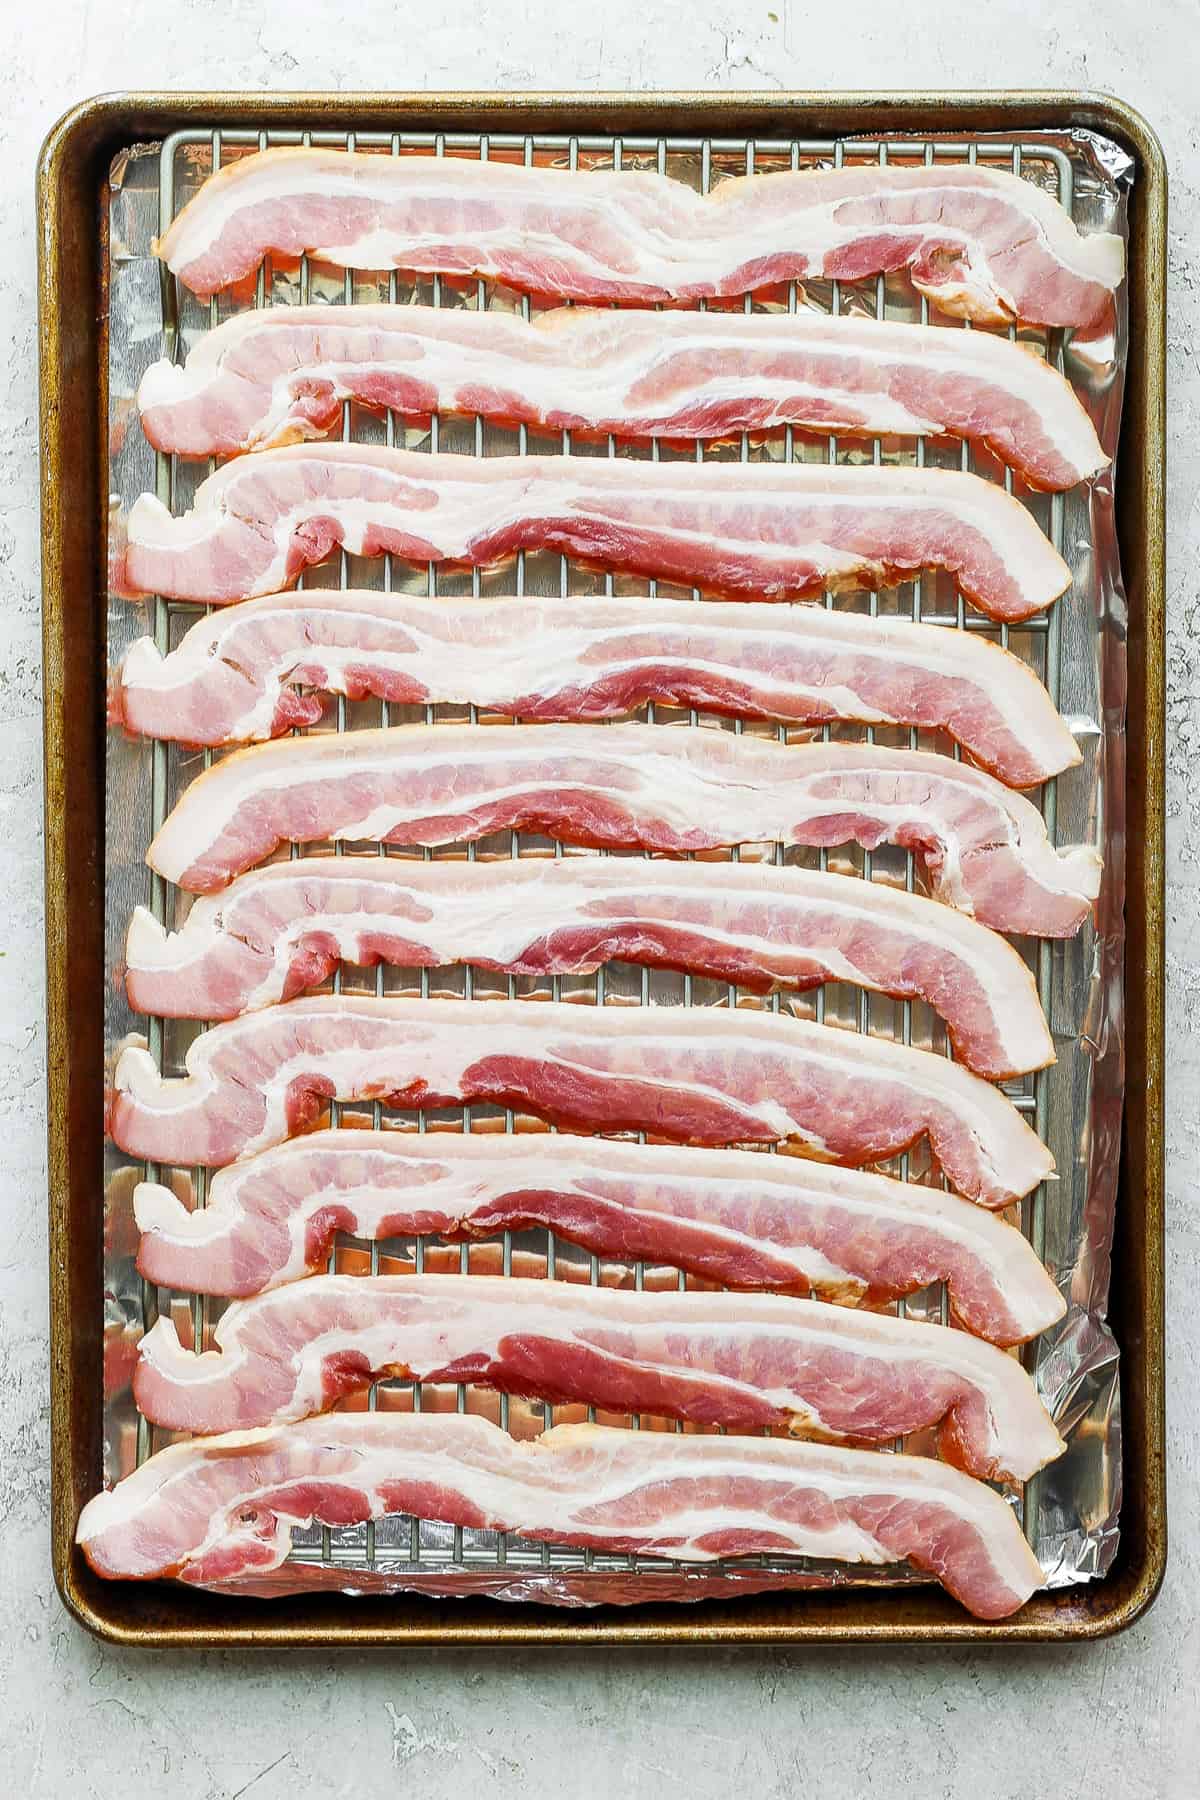 https://fitfoodiefinds.com/wp-content/uploads/2023/06/Bacon-in-the-oven-10.jpg